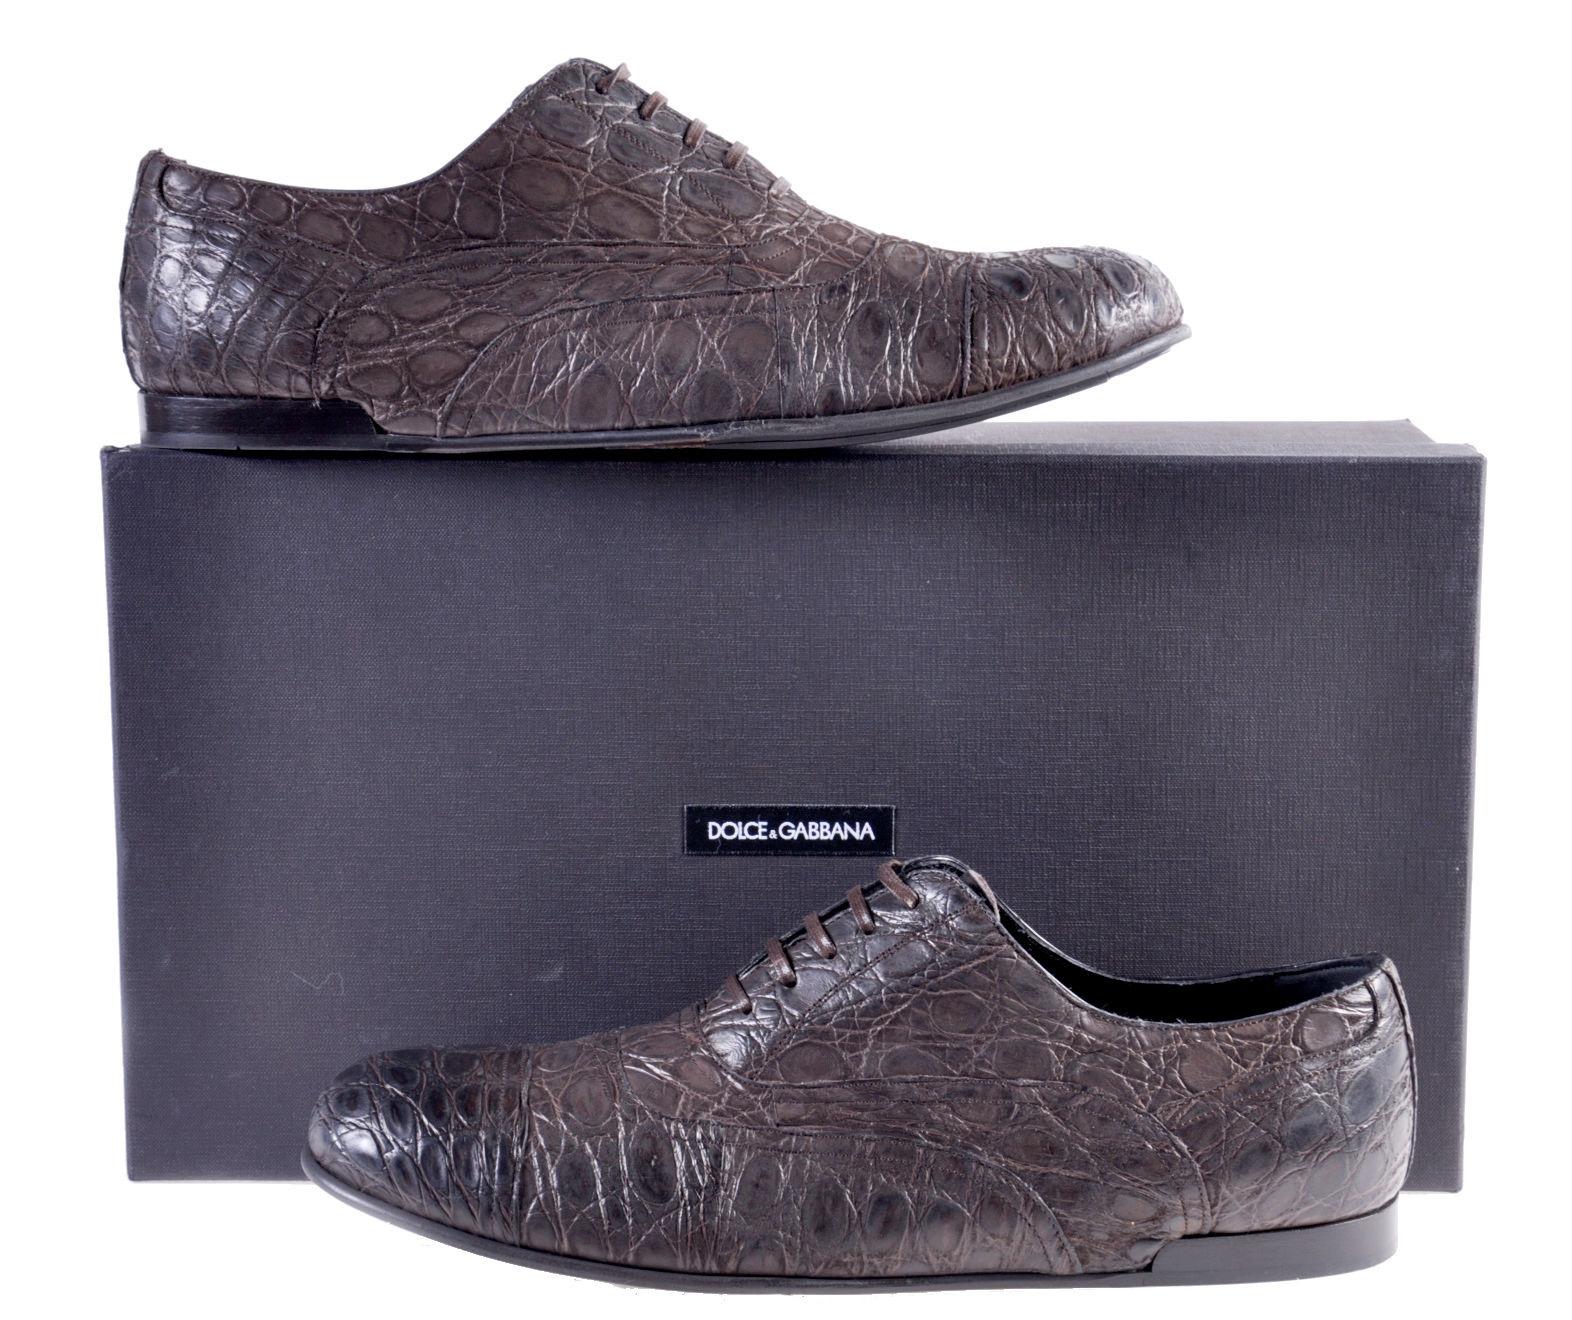 Men's NEW DOLCE & GABBANA BROWN CROCODILE LEATHER SHOES for MEN 43 - US 10